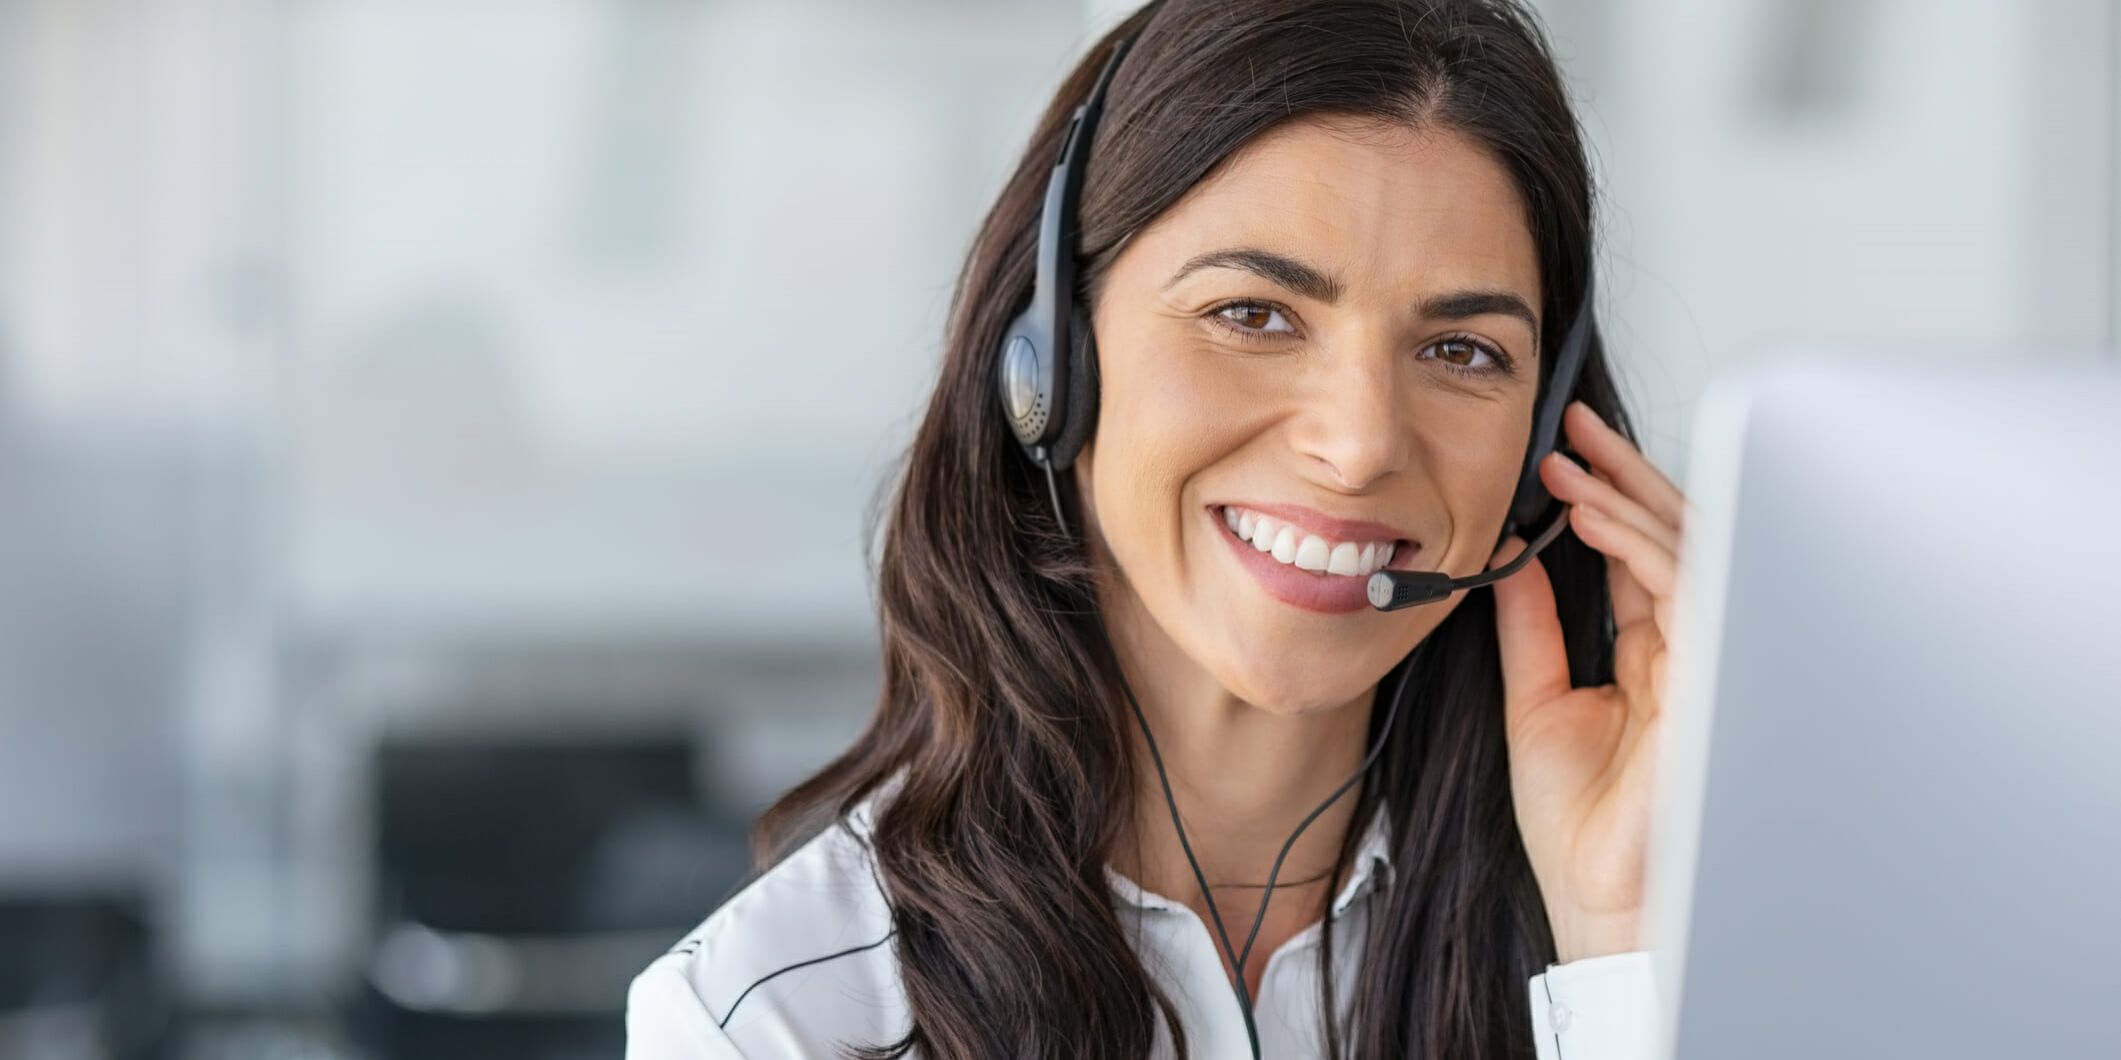 Call center agent with headset working on support hotline in modern office with copy space. Portrait of mature positive agent in conversation with customer over headset looking at camera. Consulting and assistance service customer support.